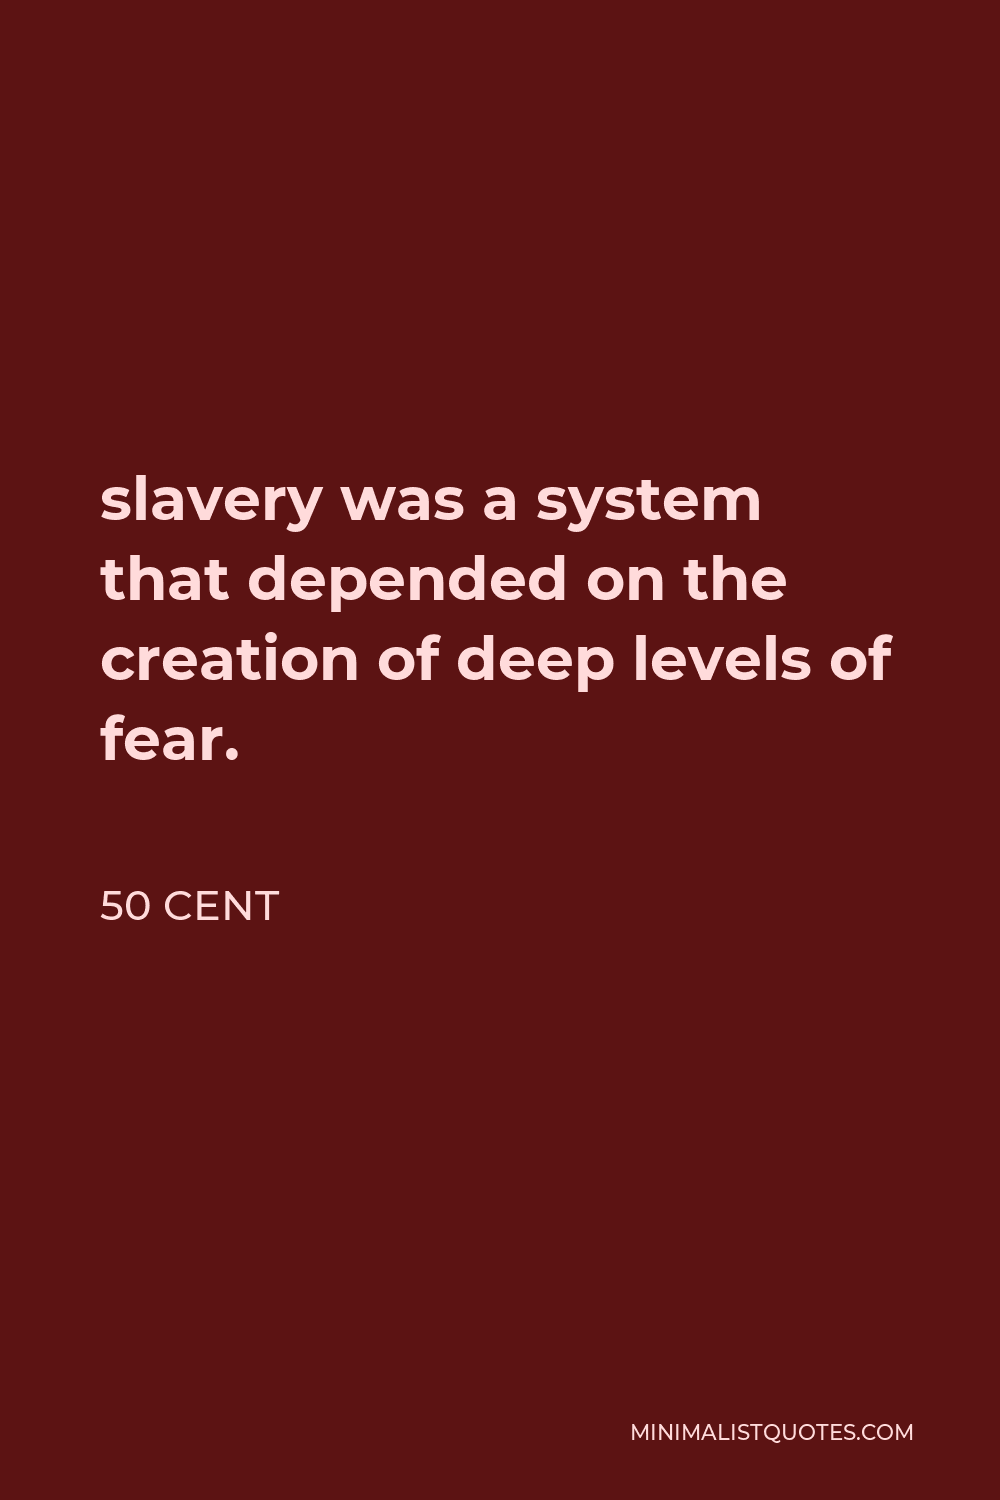 50 Cent Quote - slavery was a system that depended on the creation of deep levels of fear.